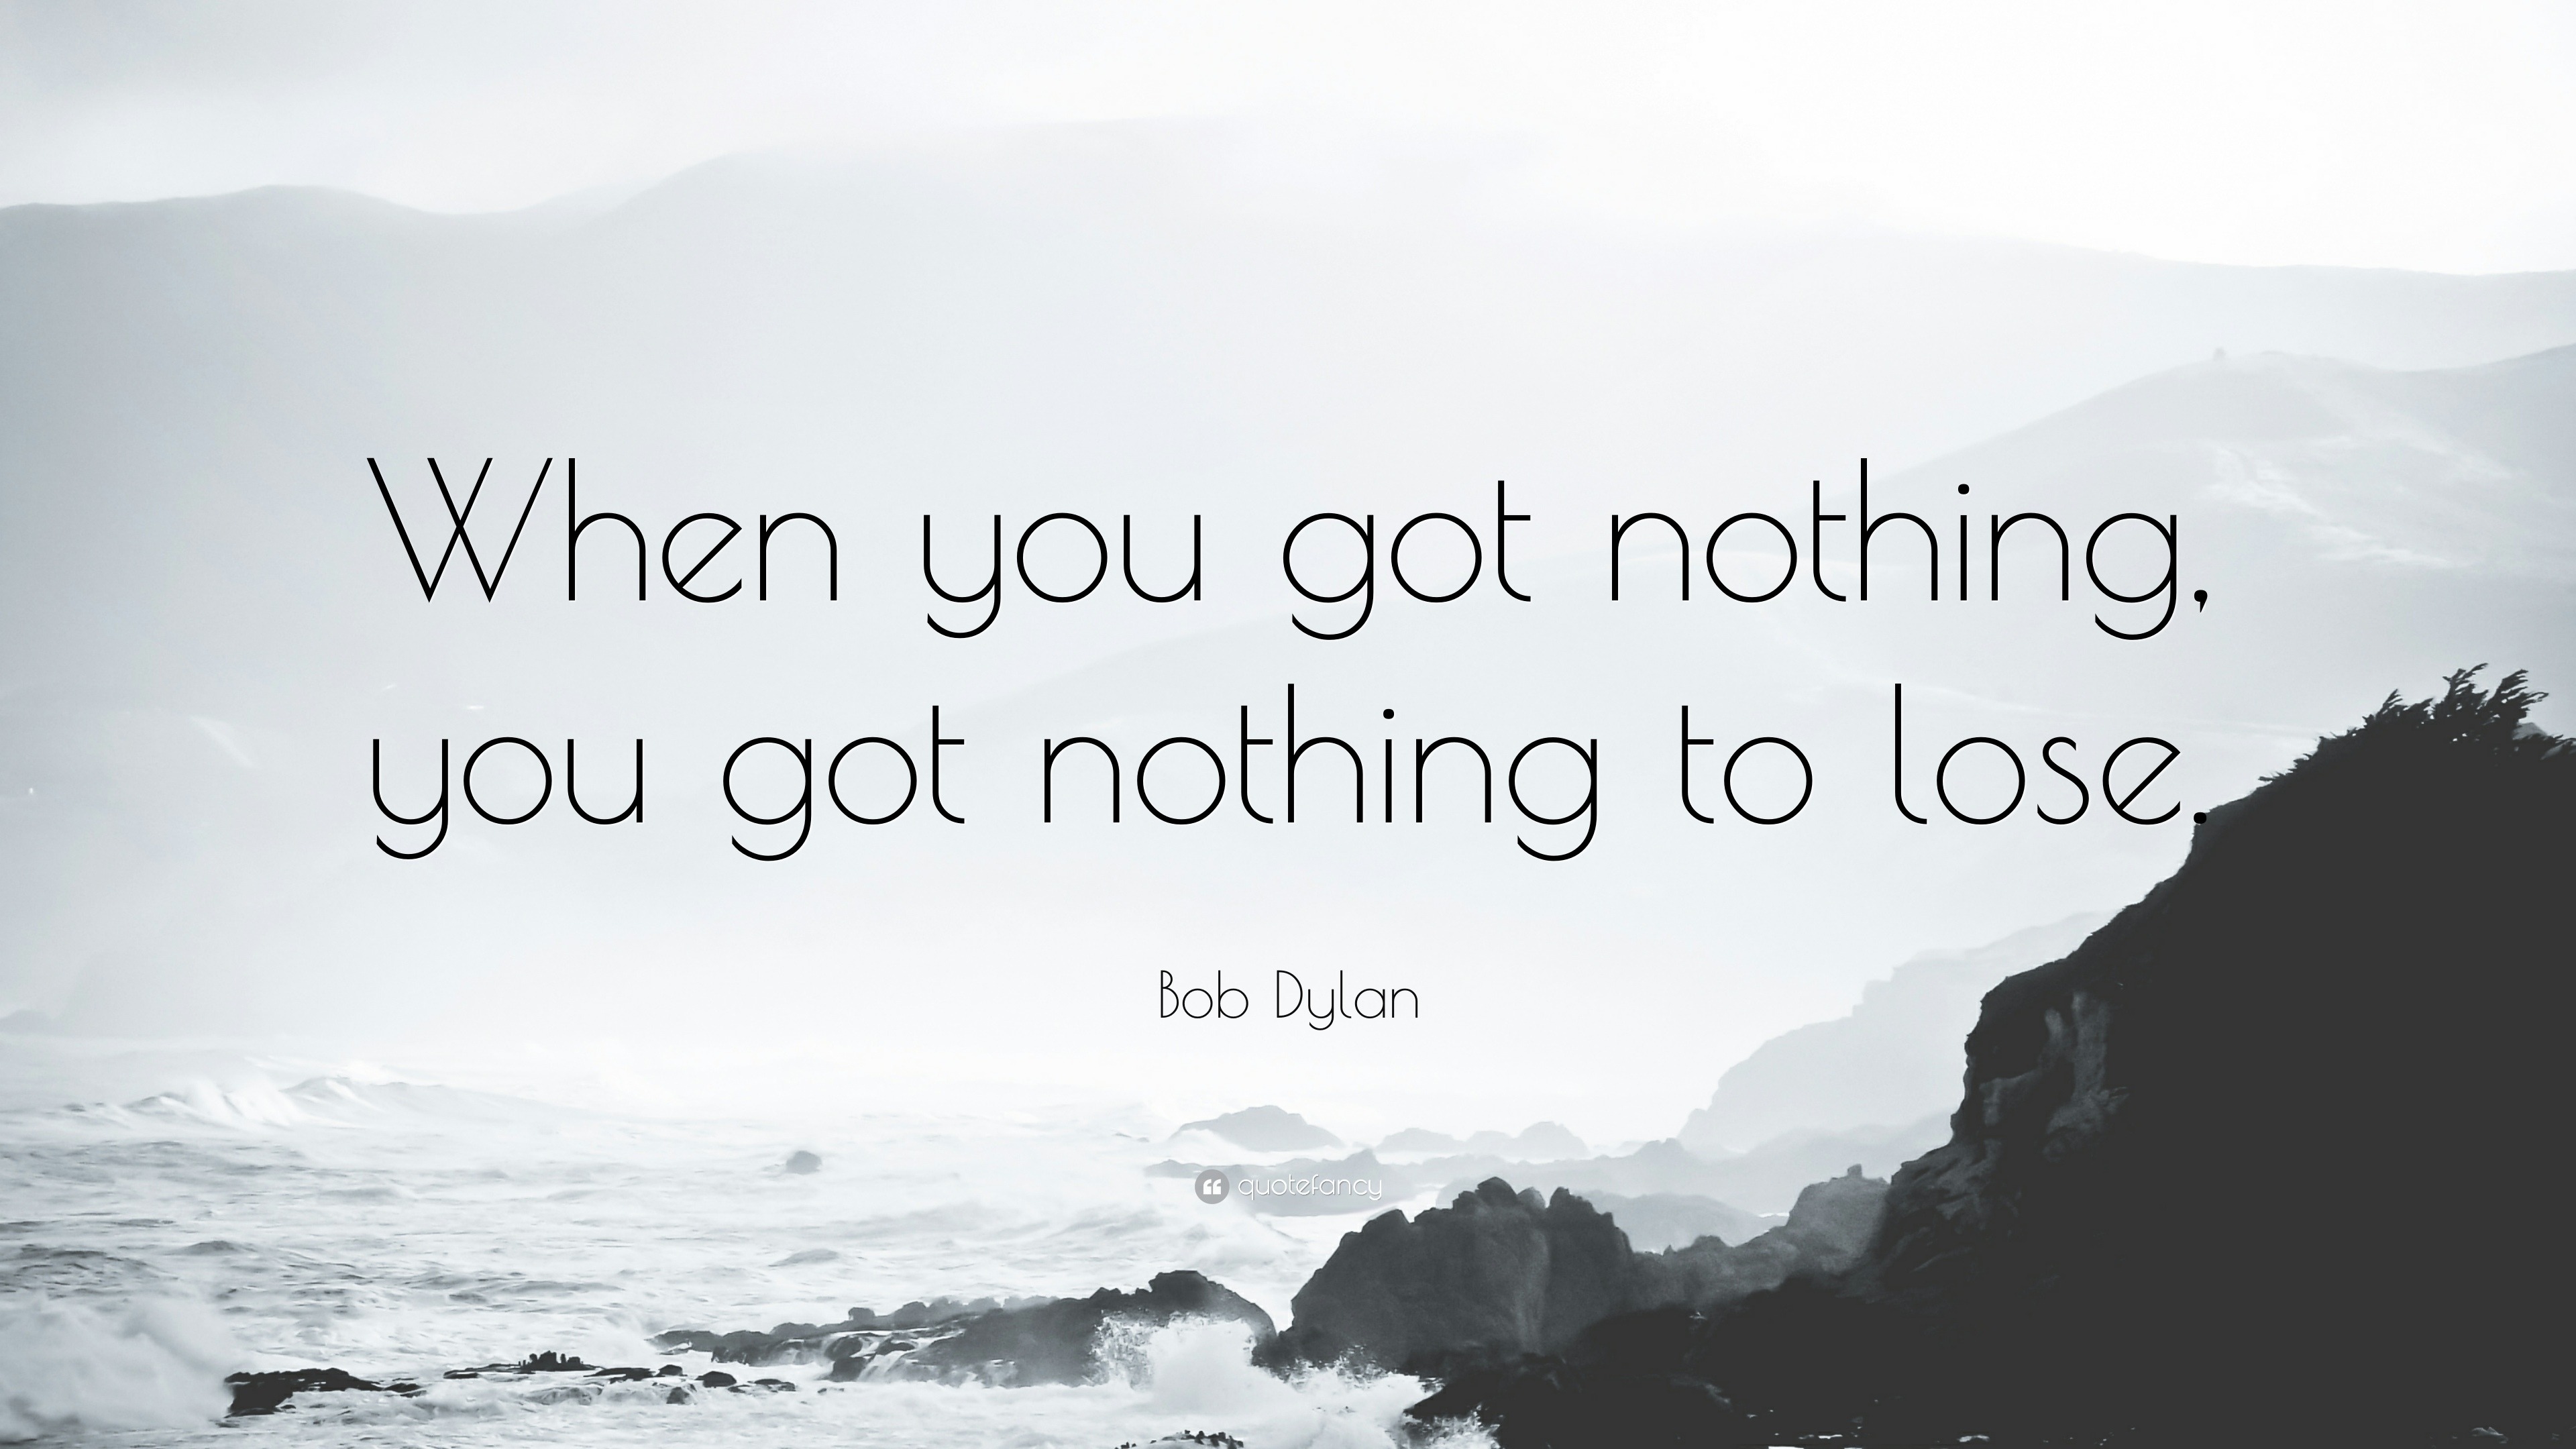 Bob Dylan Quote: “When you got nothing, you got nothing to lose.”